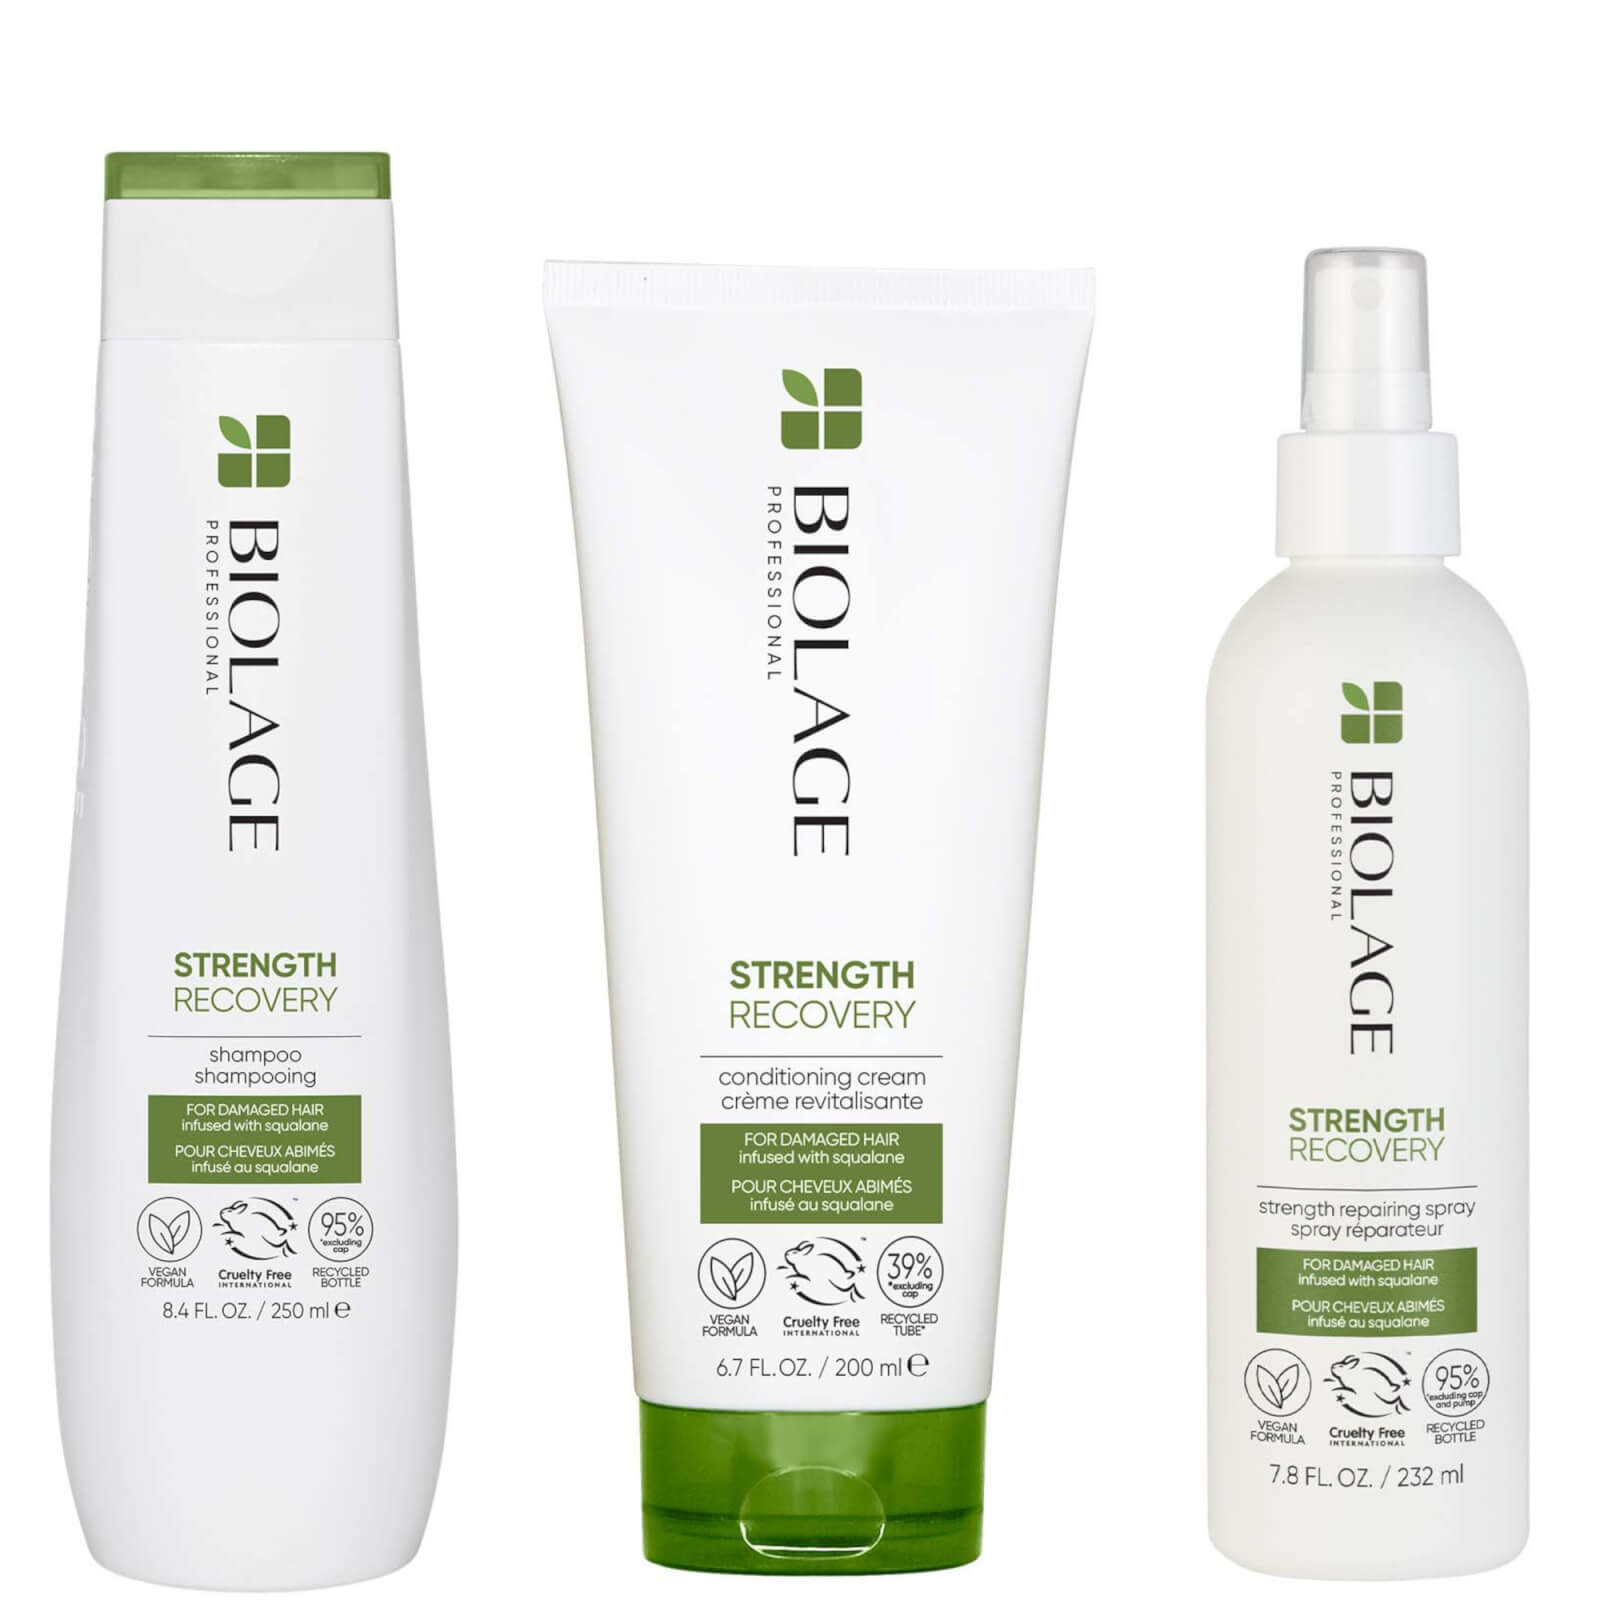 Biolage Professional Strength Recovery Vegan Cleansing Shampoo, Conditioner and Leave-in Spray Routi